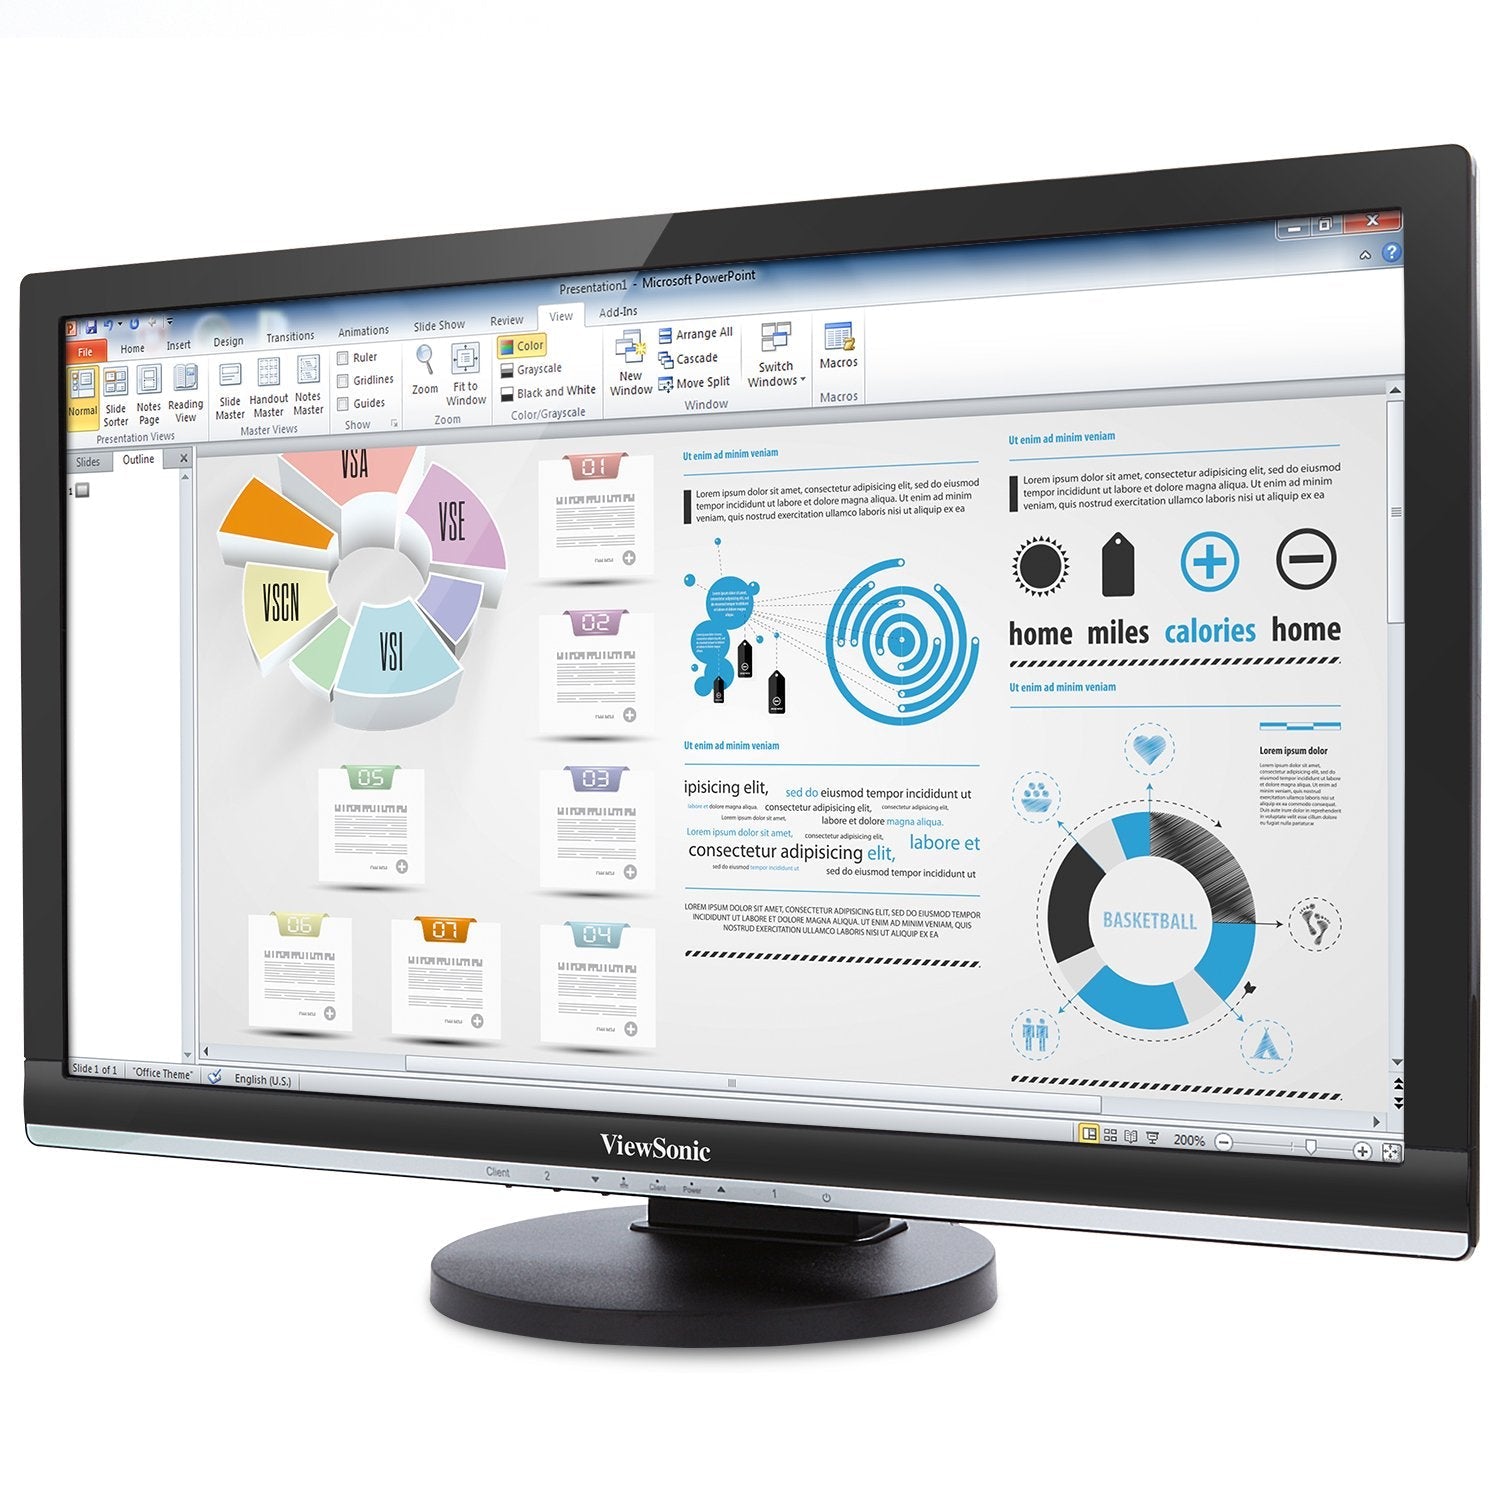 ViewSonic SD-T245_BK_US0-R 24" Thin Integrated Client Monitor - Certified Refurbished